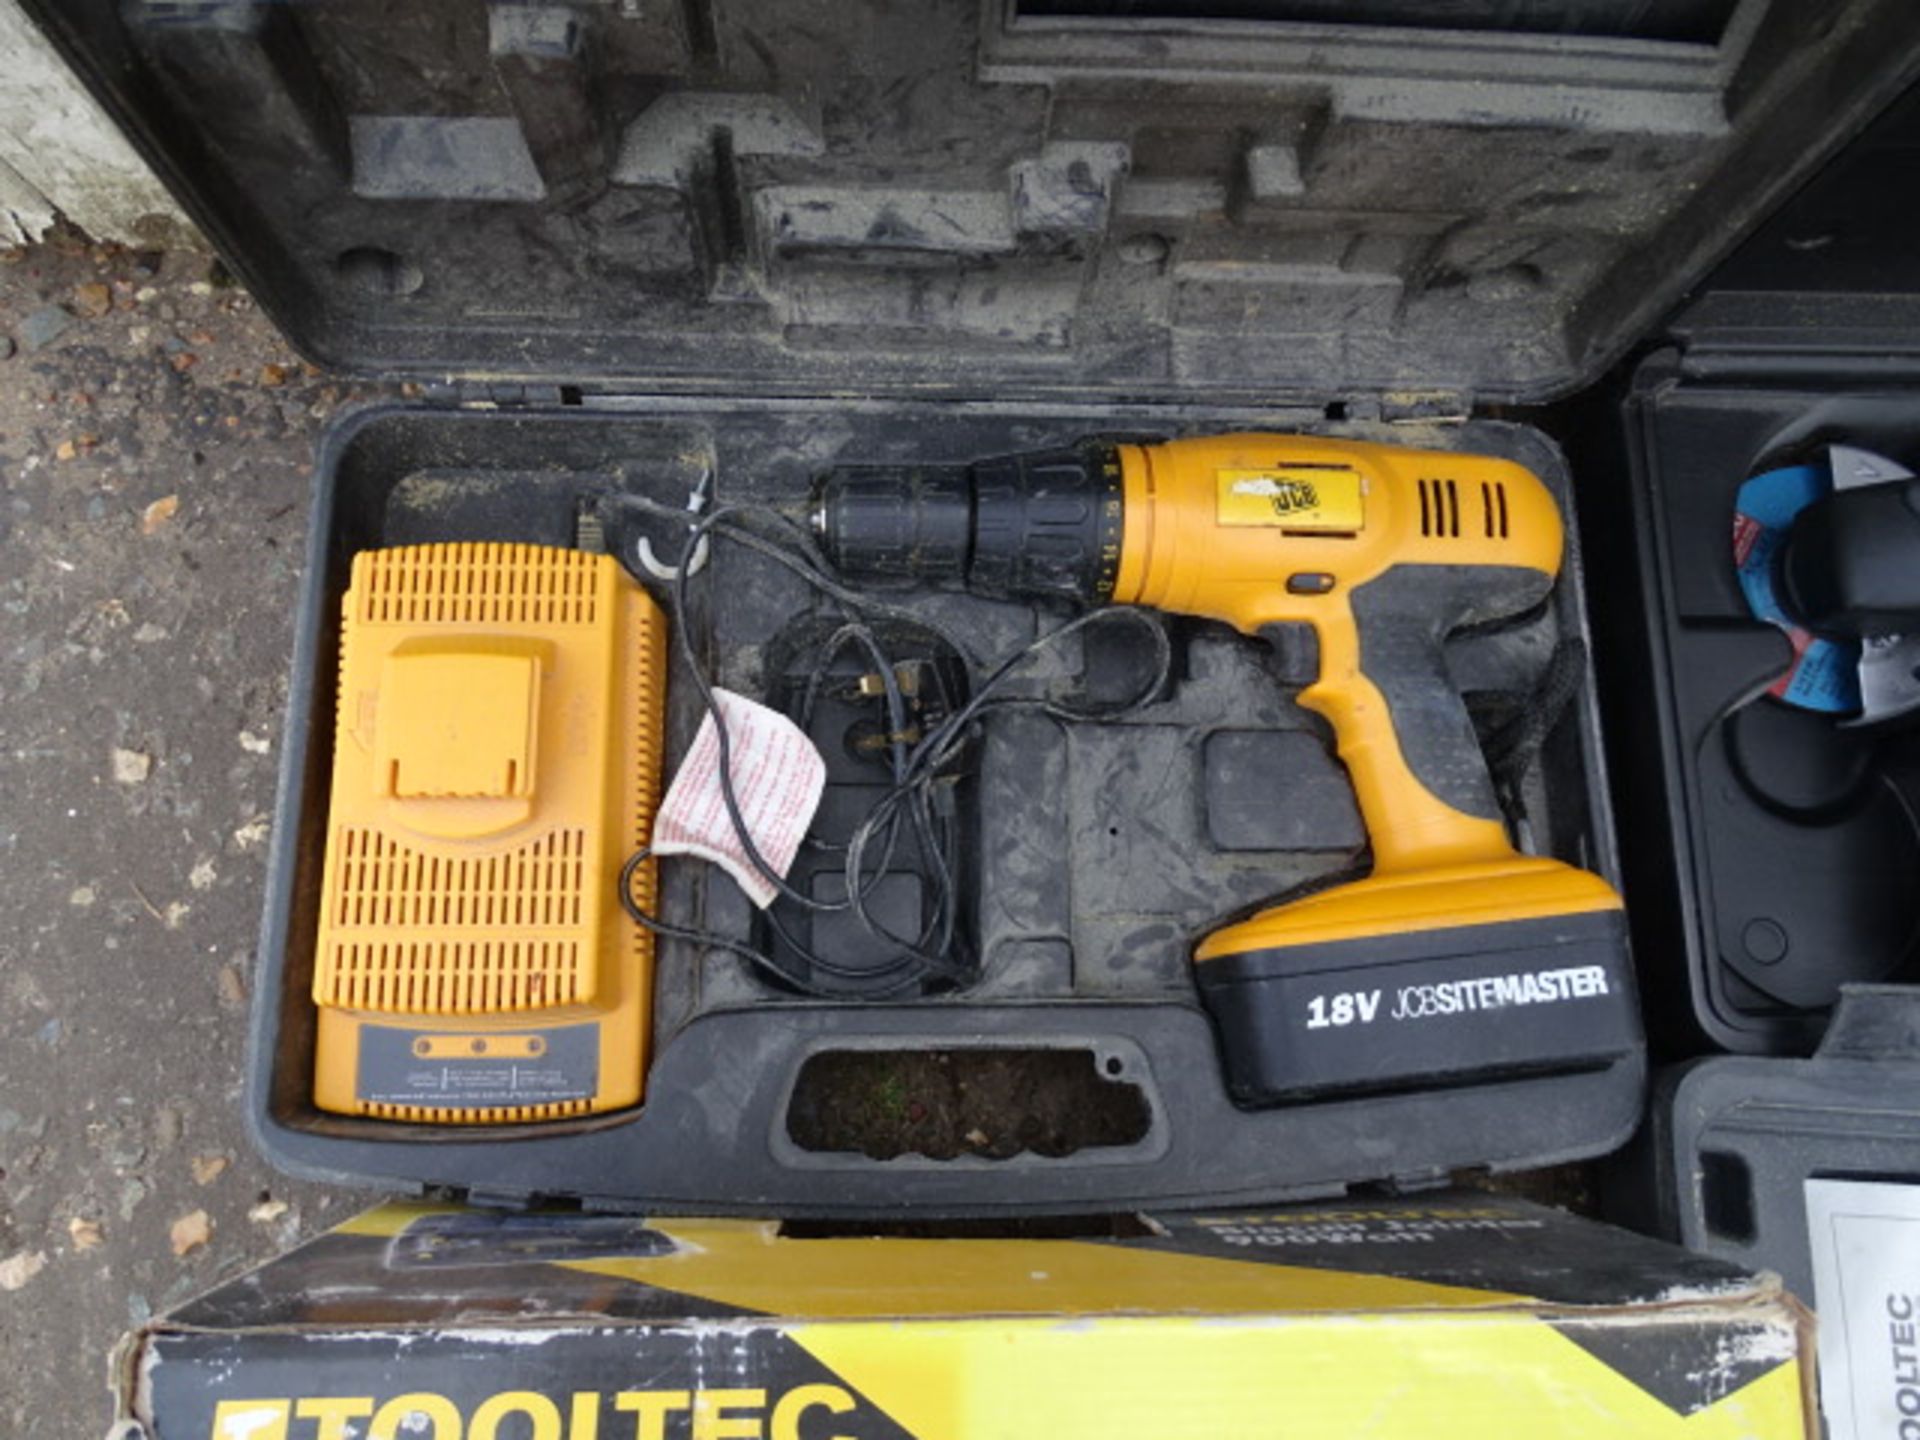 JCB cordless drill, angle grinder and Tooltec biscuit jointer - Image 2 of 5